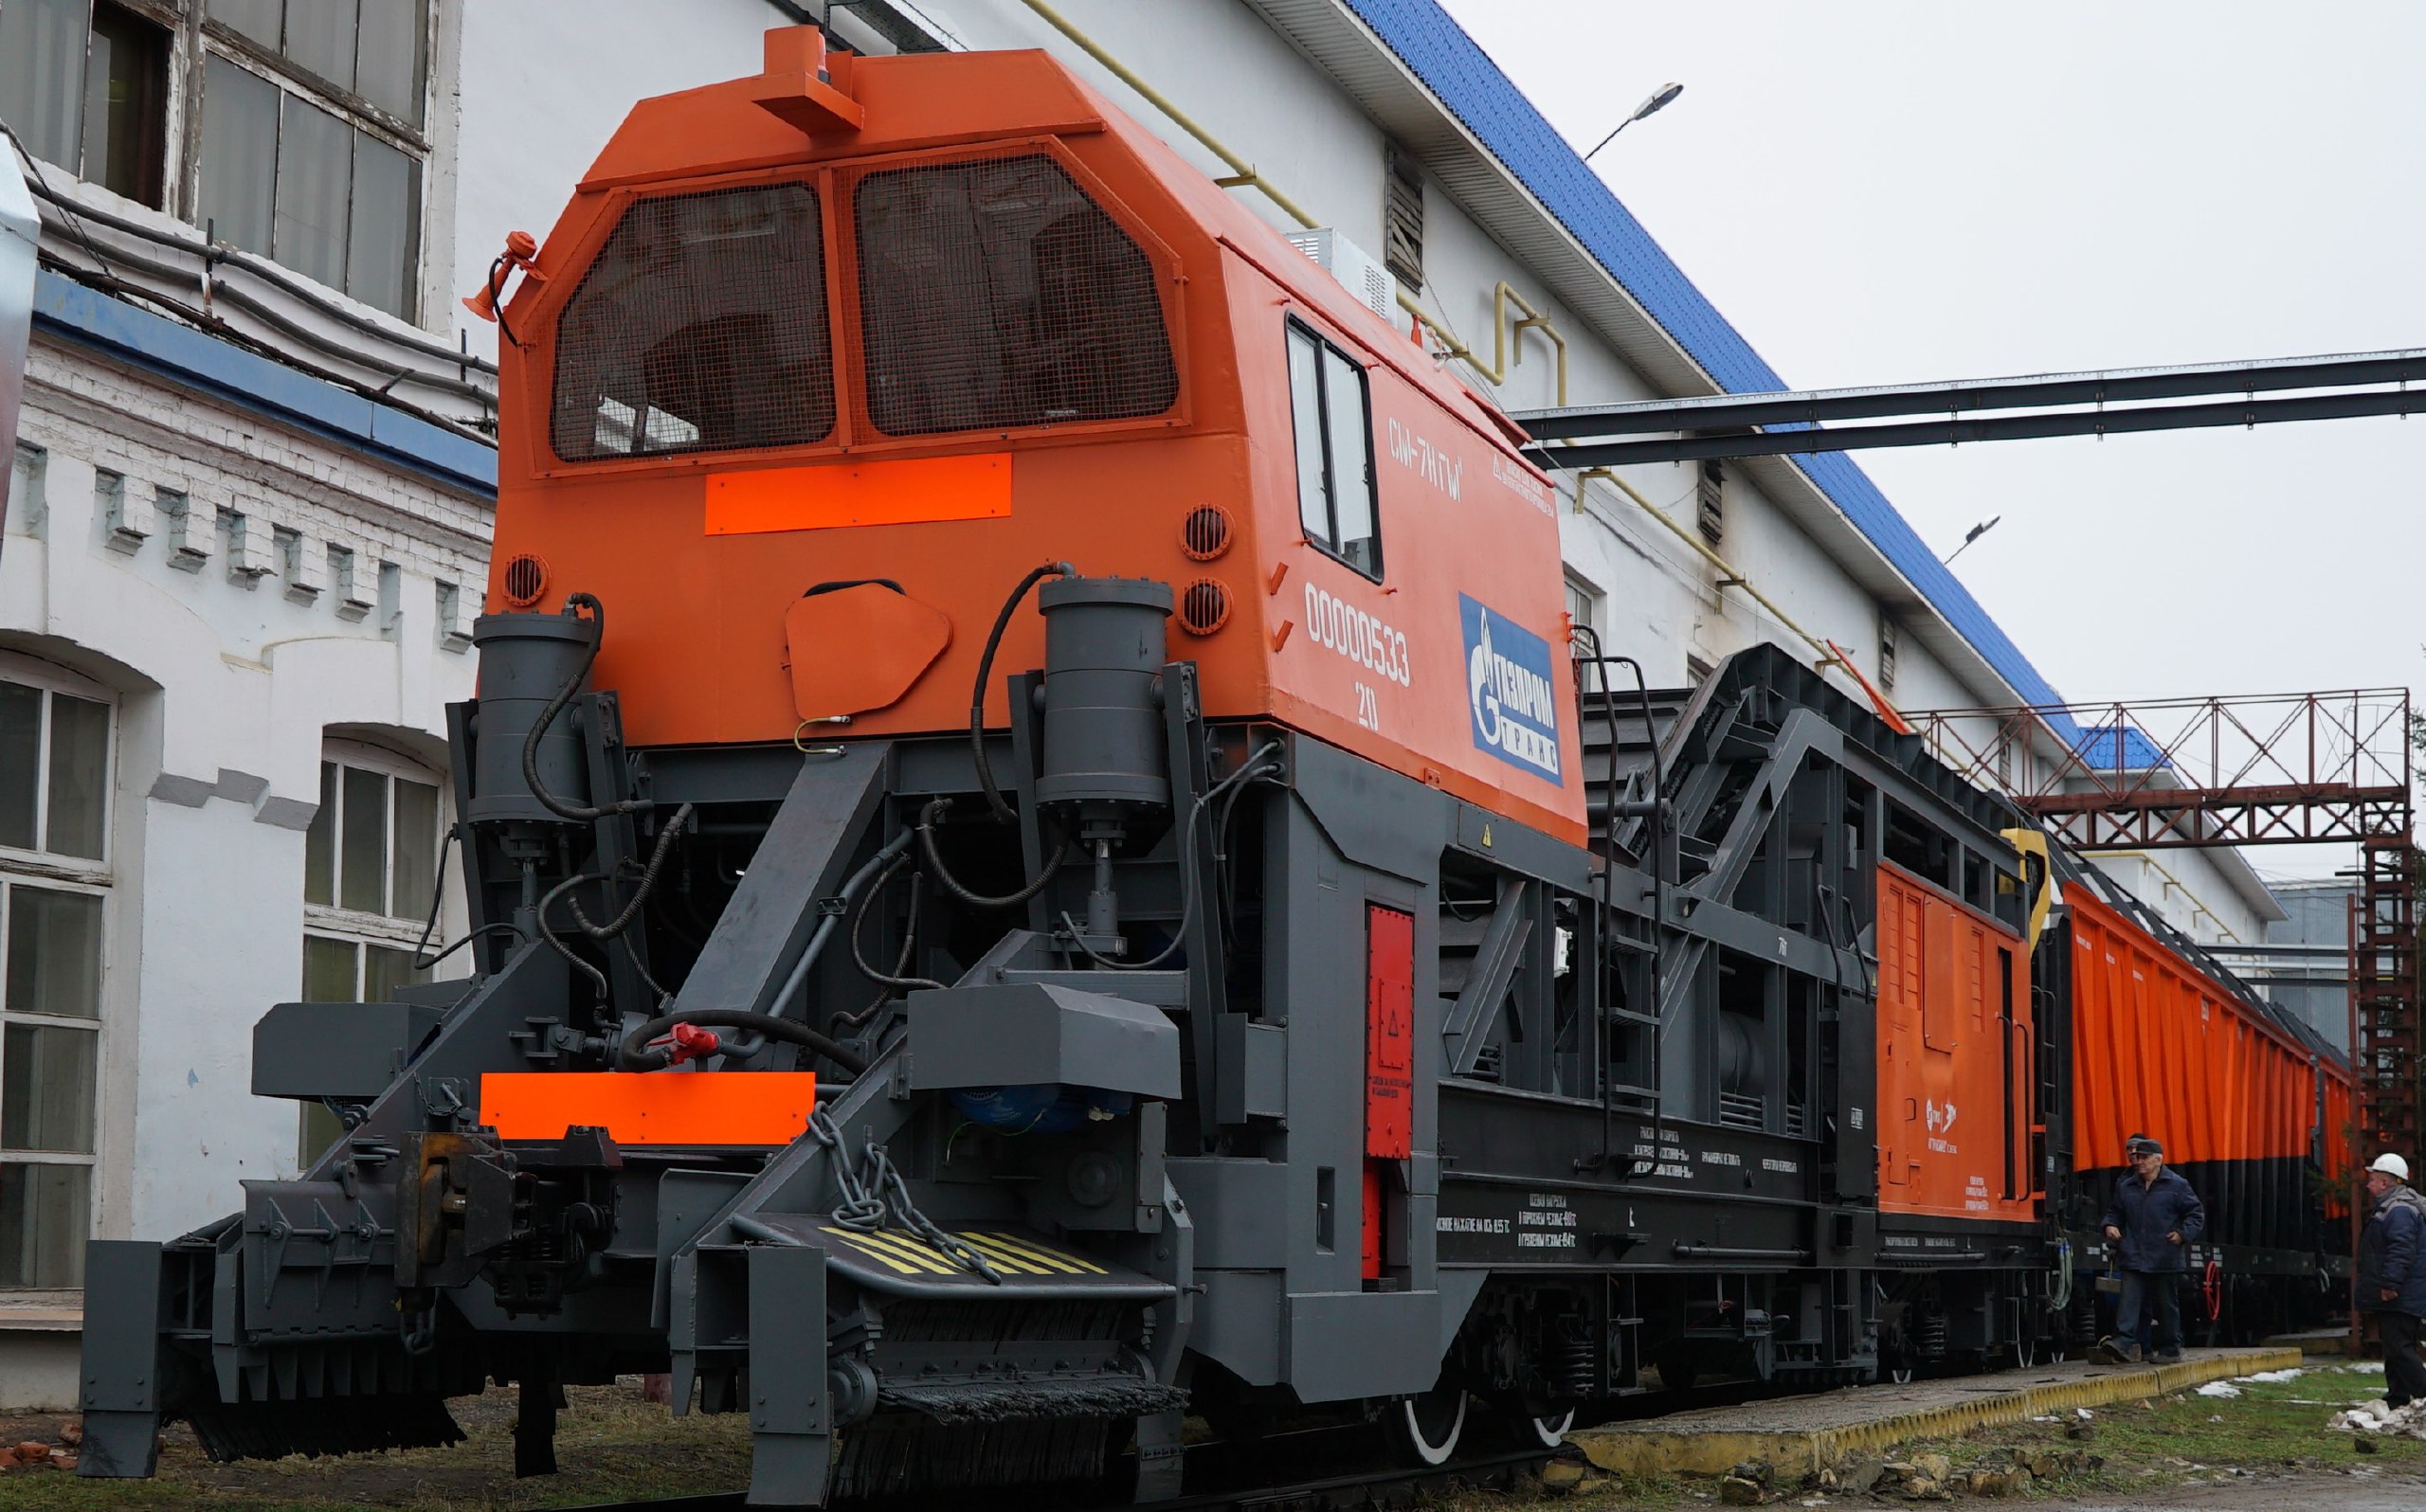 The SM-7N snow clearing train